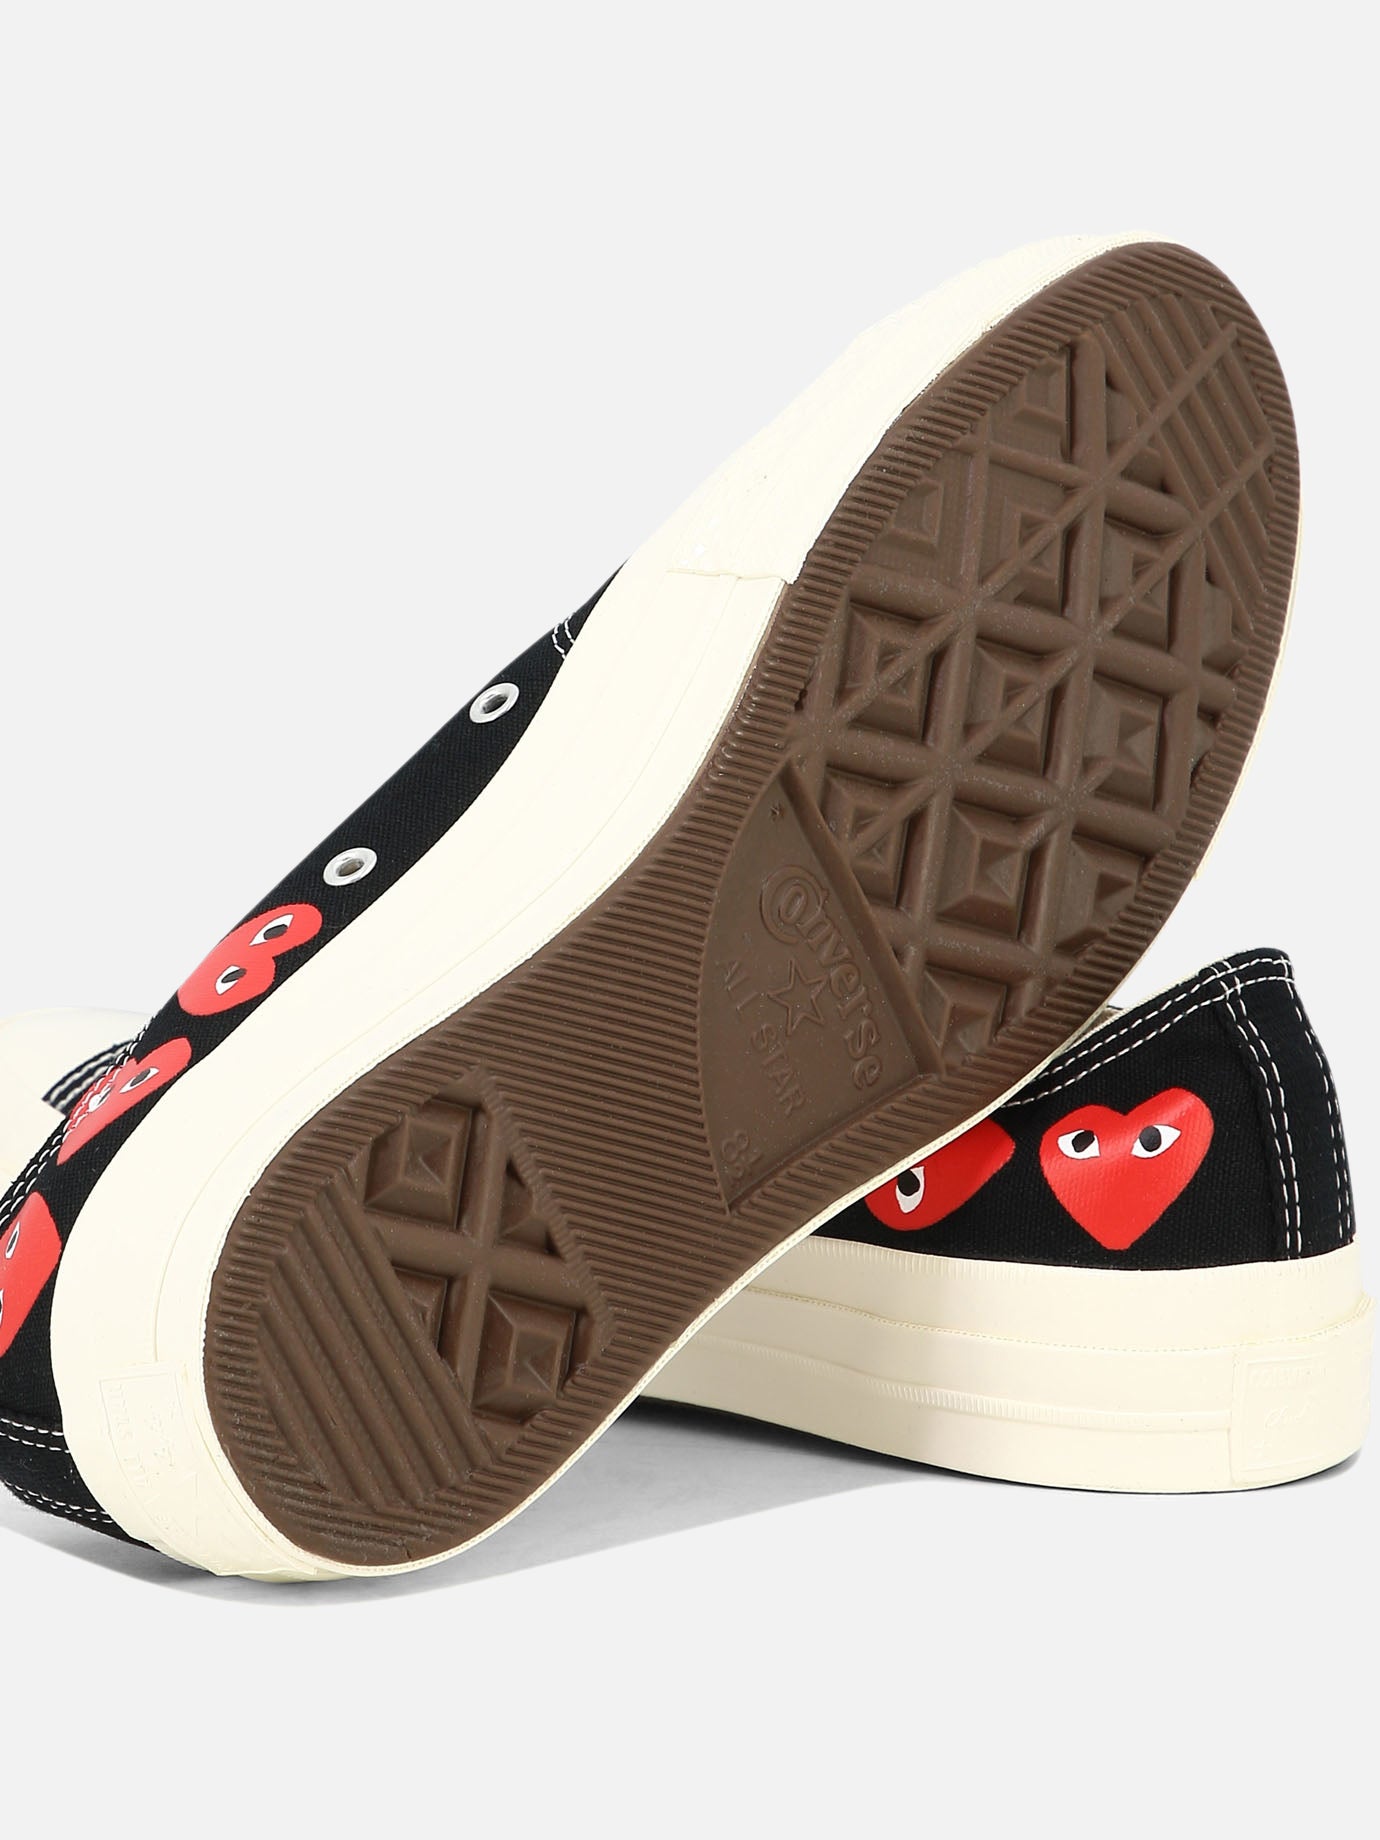 "Small Hearts" sneakers